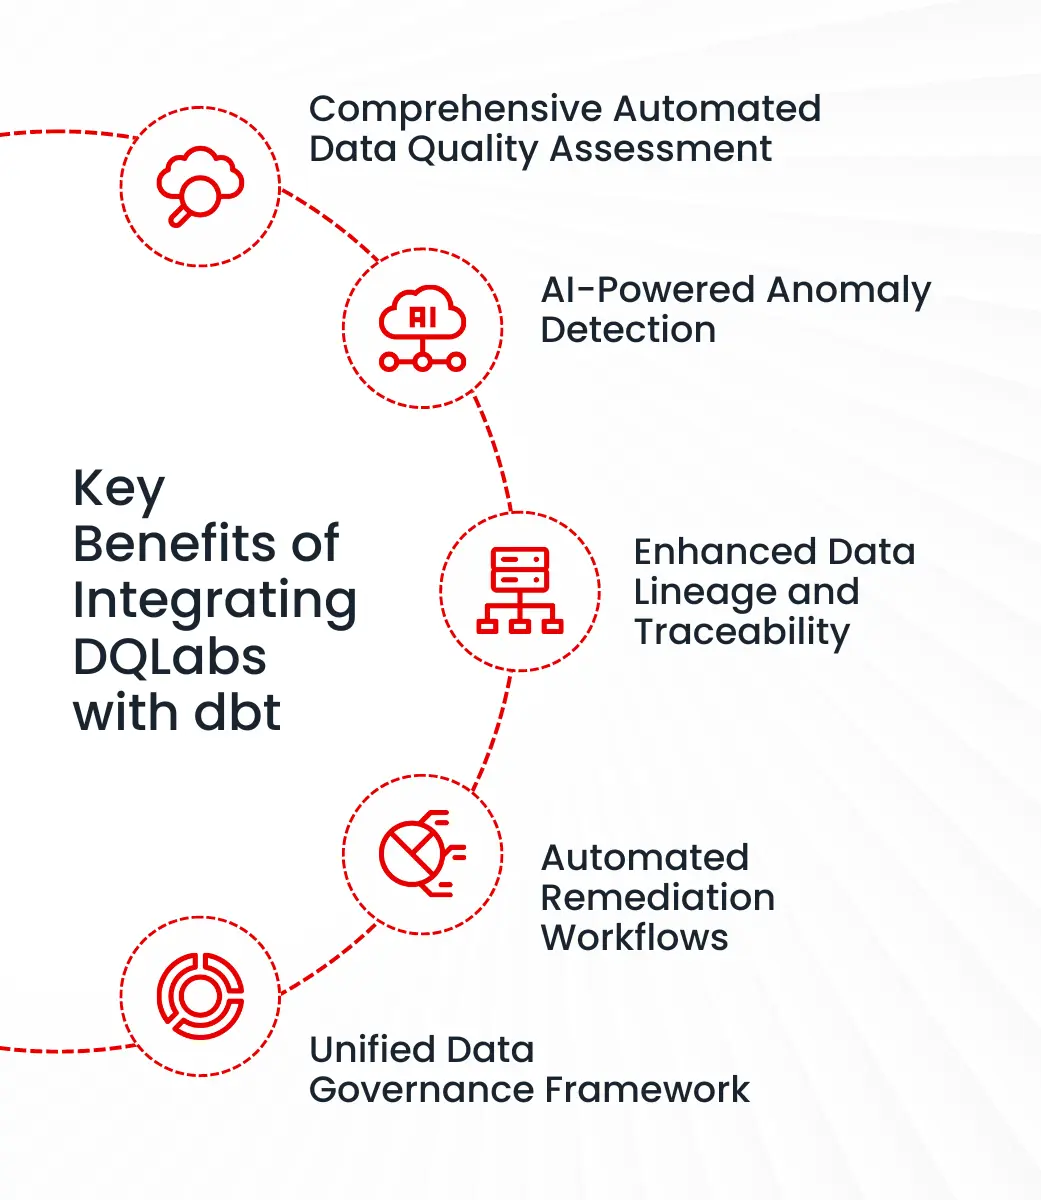 Key Benefits of Integrating DQLabs with dbt